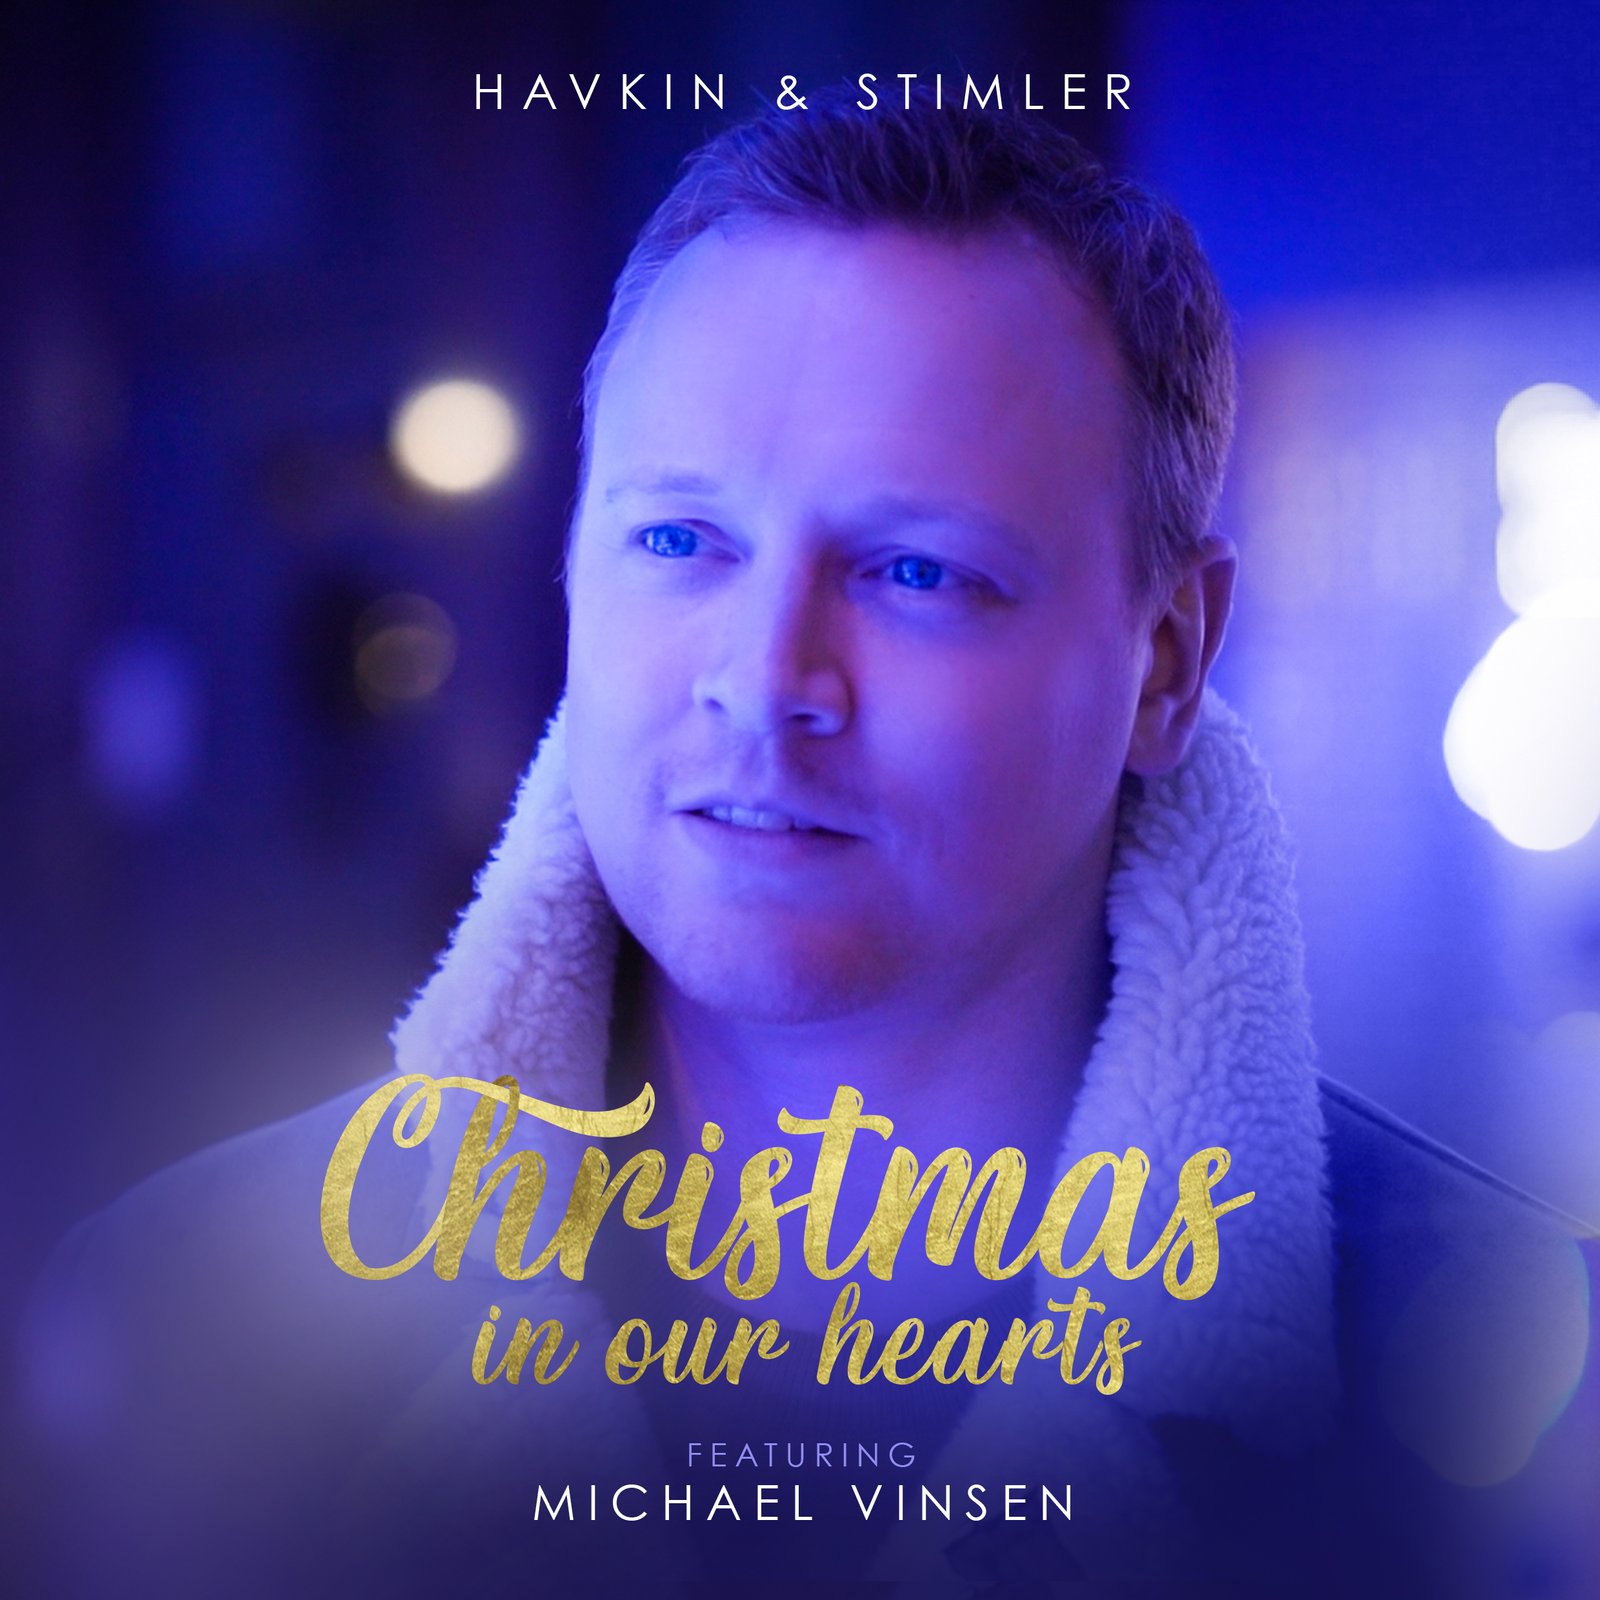 Christmas in our hearts by Havkin and Stimler performed by Michael Vinsen - media and management by Eamonn B. Shanahan for Pinstripe Media